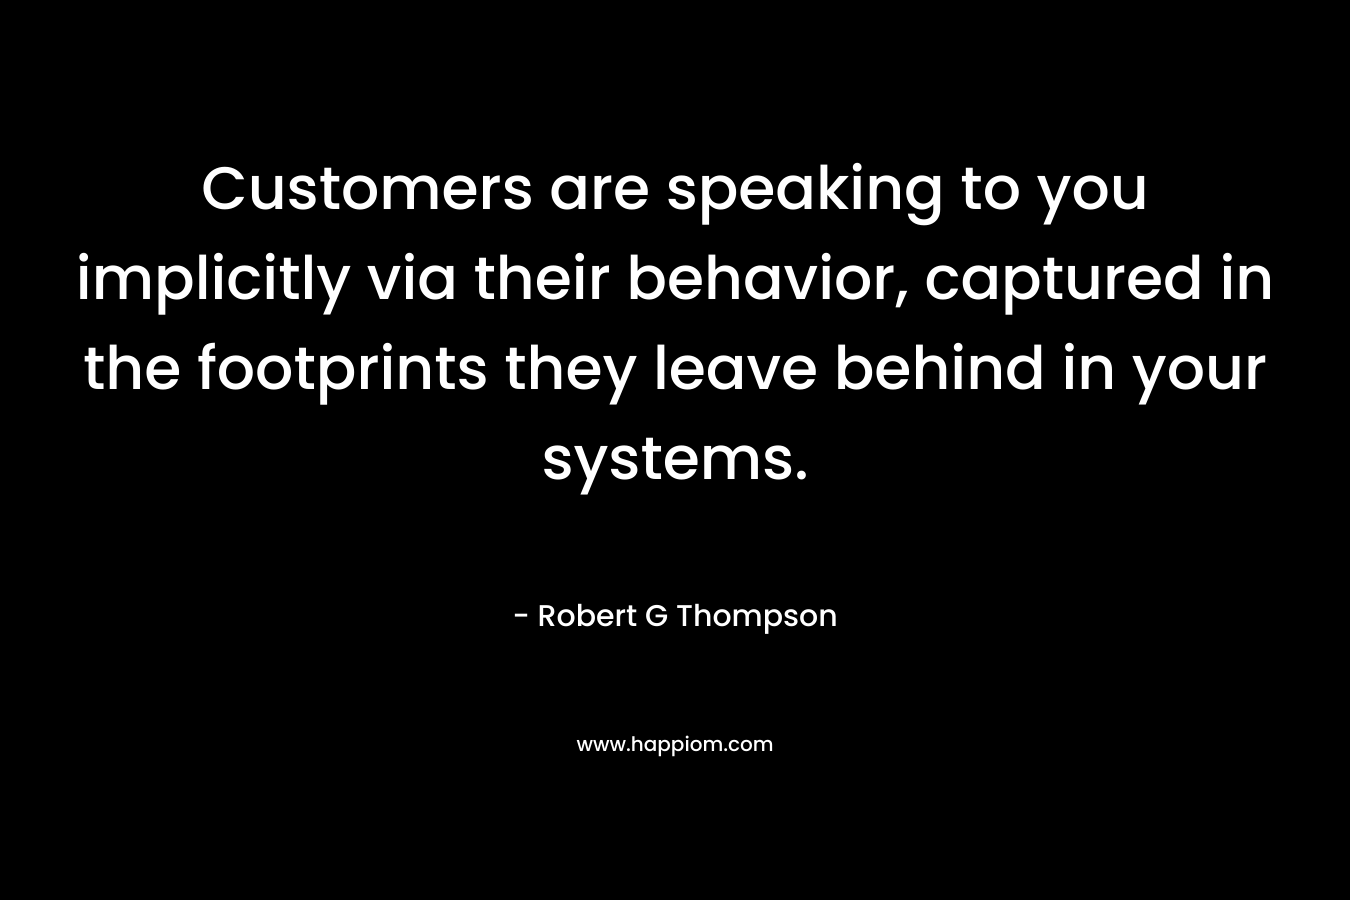 Customers are speaking to you implicitly via their behavior, captured in the footprints they leave behind in your systems.